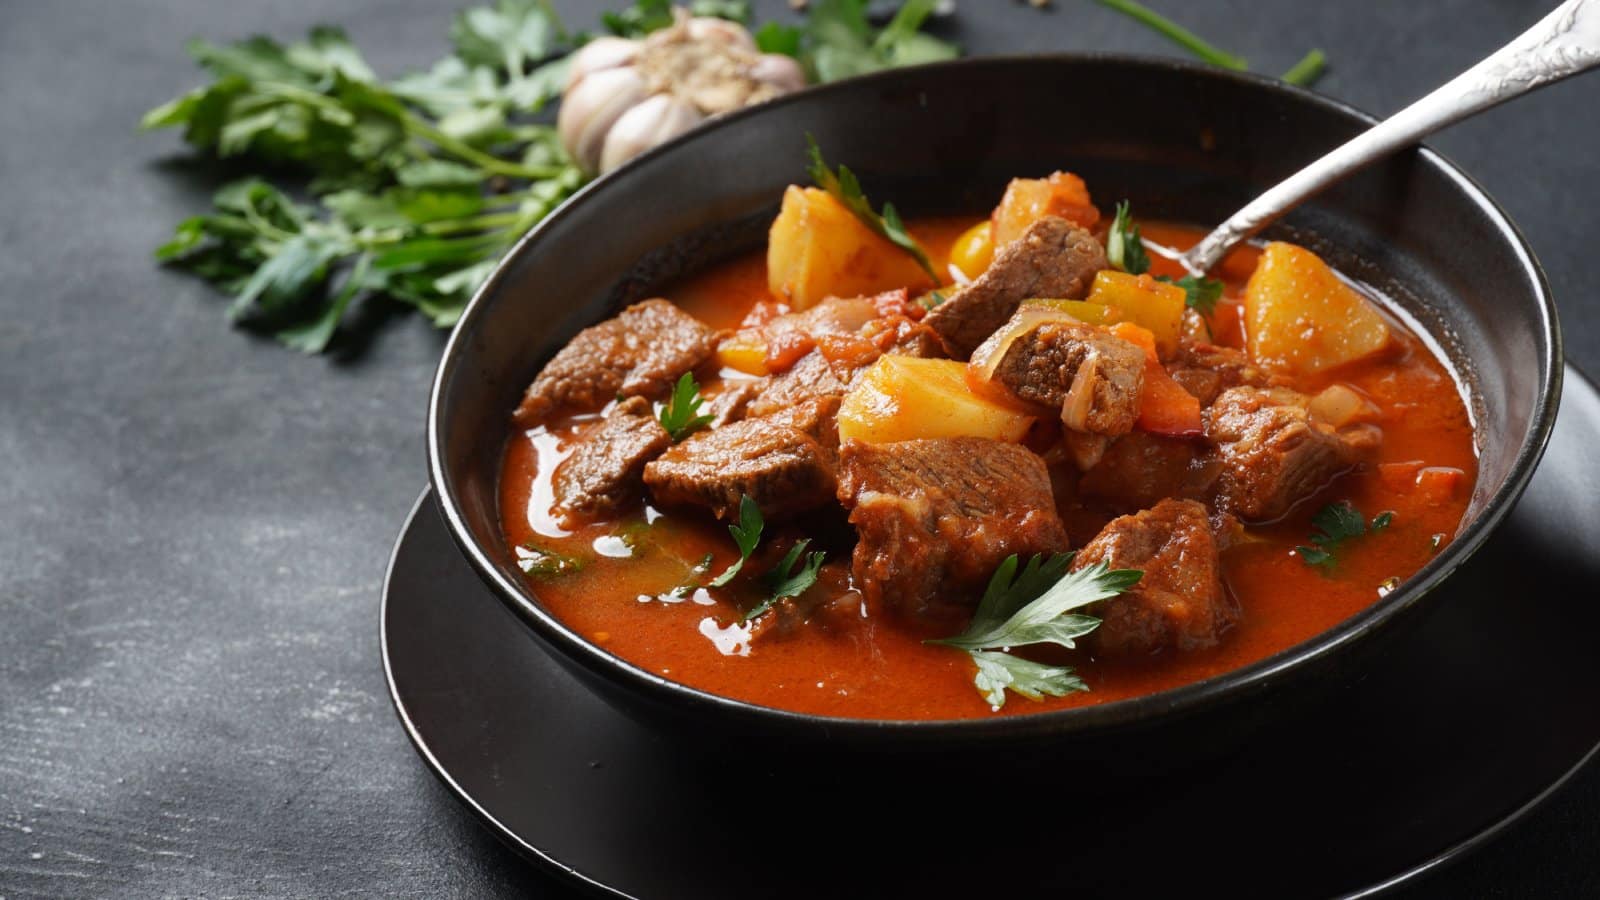 Image Credit: Shutterstock / Natalia Hanin <p>A warm, comforting stew of meat and vegetables, seasoned with paprika and other spices, embodying the heart of Hungarian cuisine.</p>